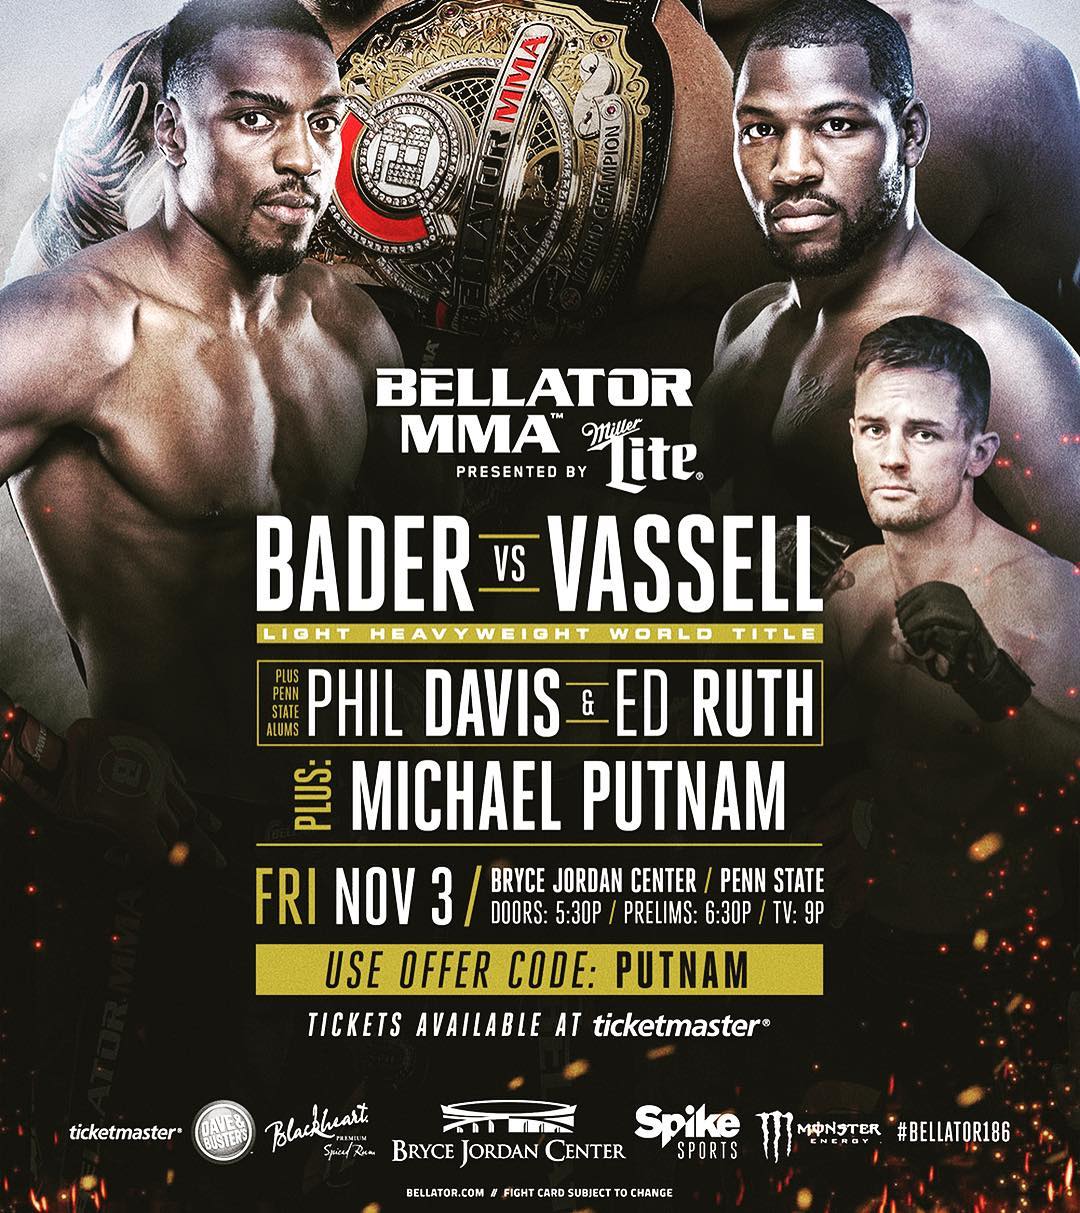 Local Whiskey would like to send a HUGE congratulations to @mputnam15 for making his @bellatormma debut at this upcoming Nov 3rd @jordancenter event!! Mike Putnam has been working @localwhiskeybar for several years, starting as a member of our security t